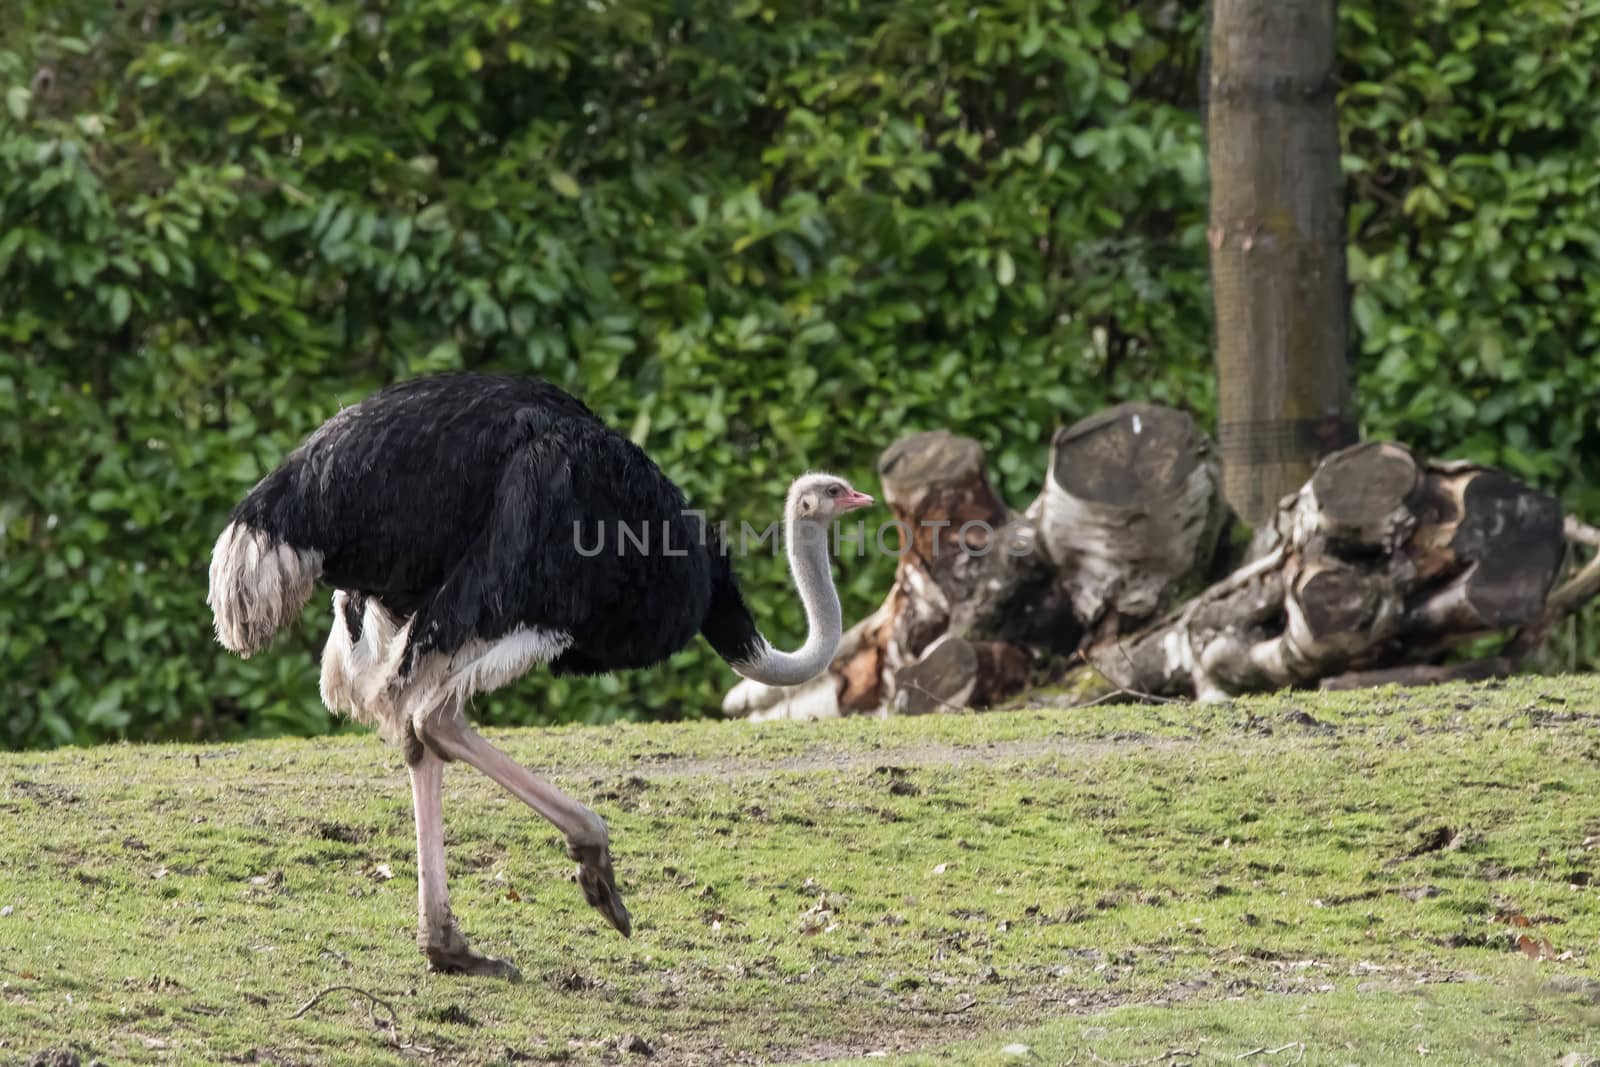 Ostrich at zoo by cestes001